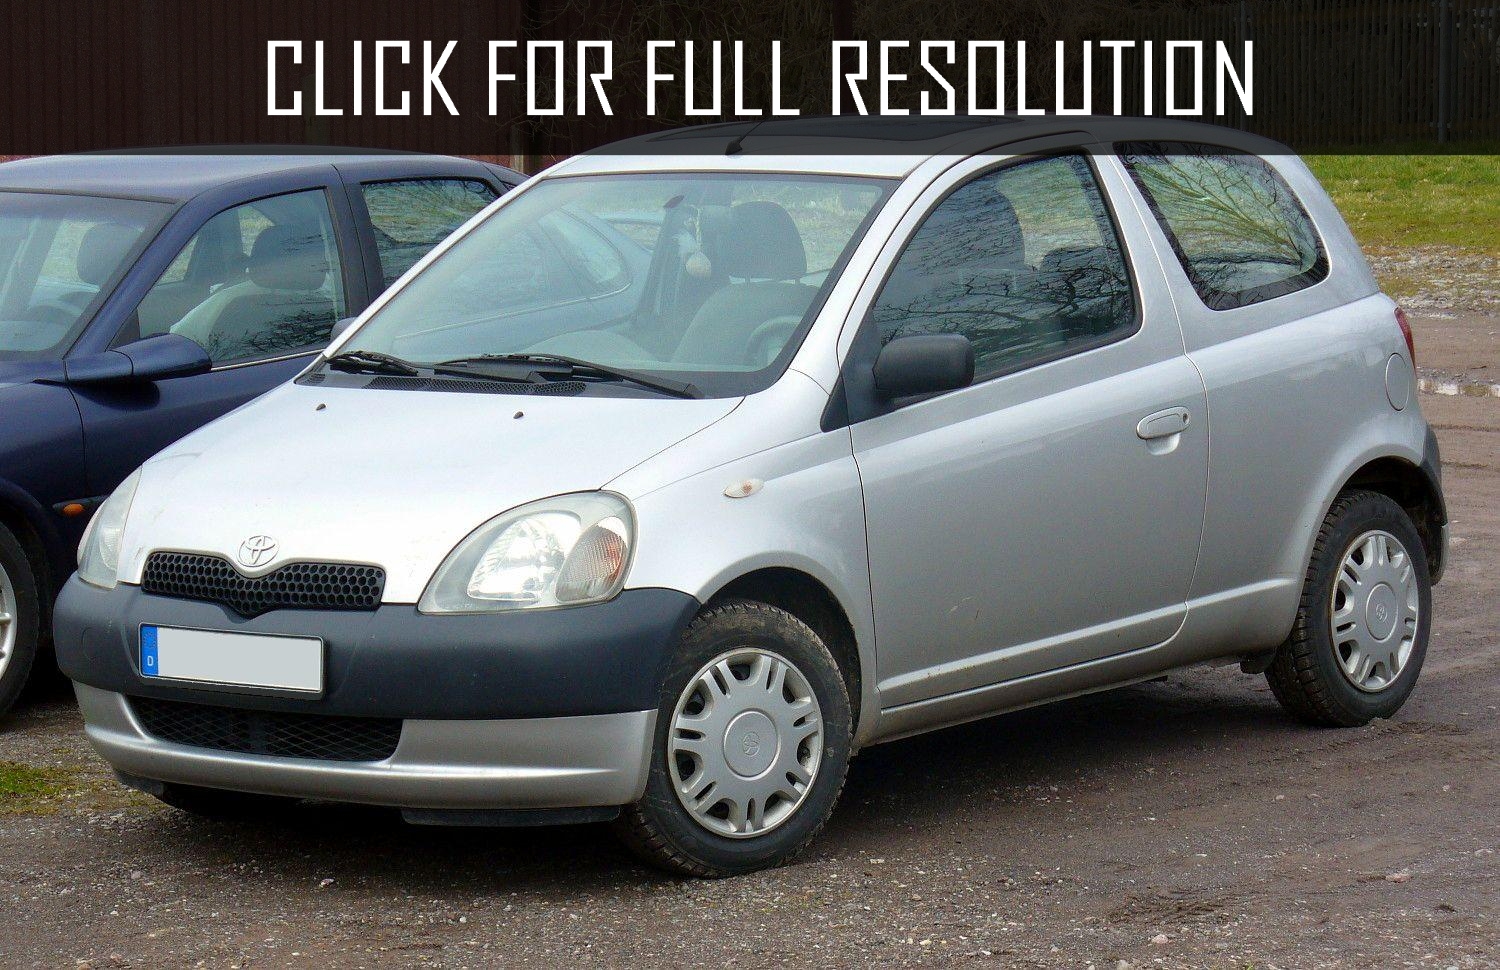 1998 Toyota Yaris News Reviews Msrp Ratings With Amazing Images